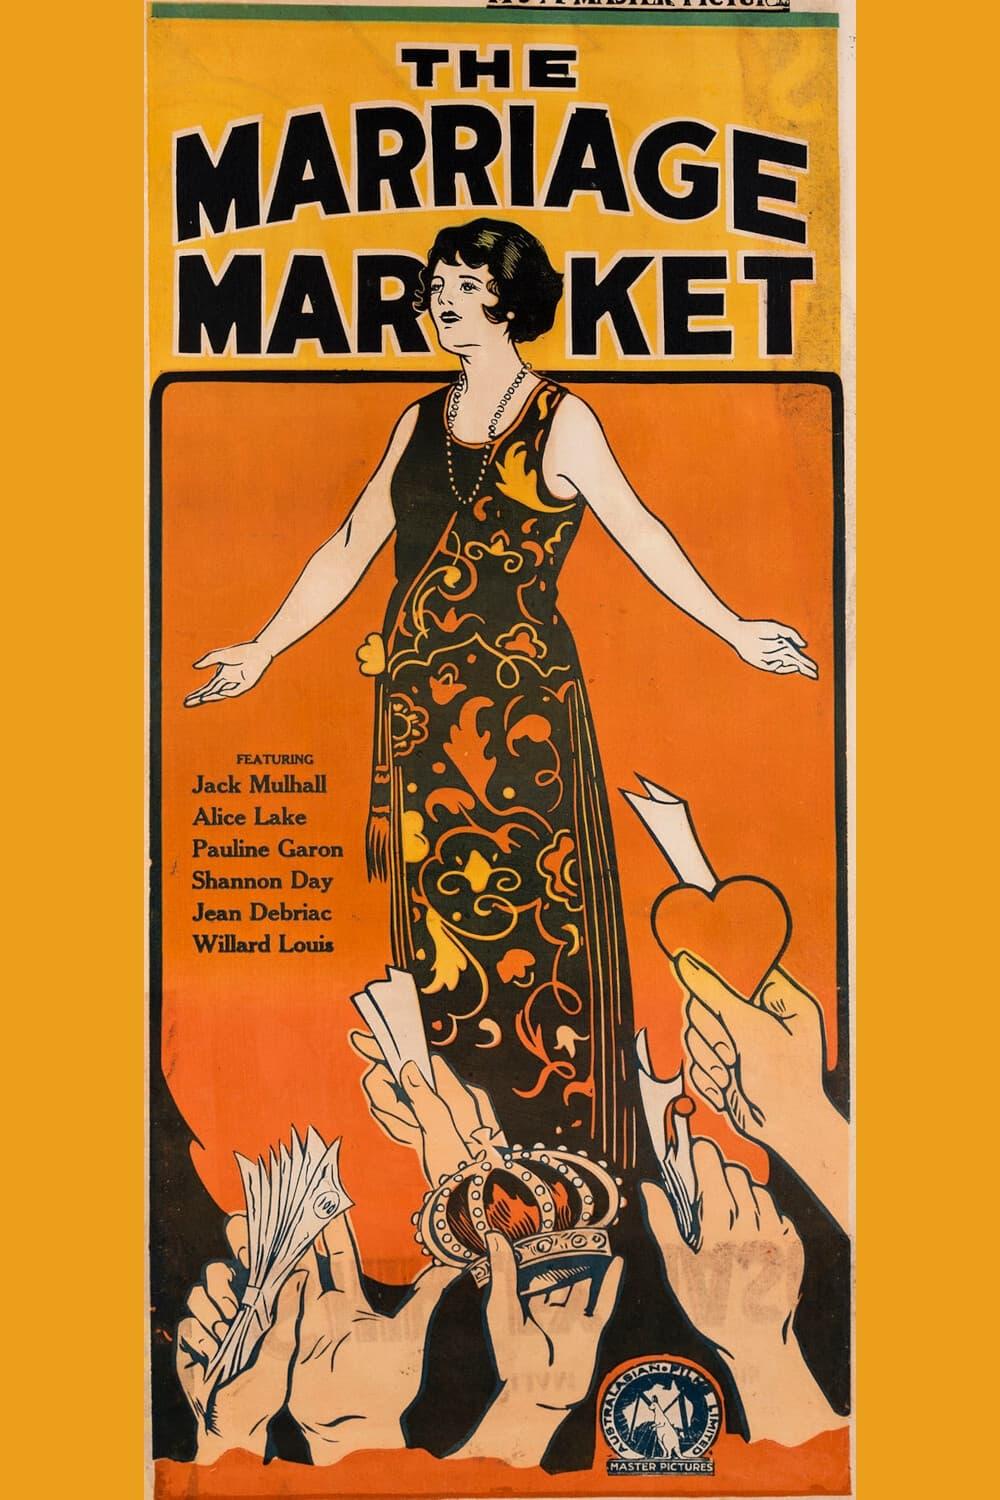 The Marriage Market poster